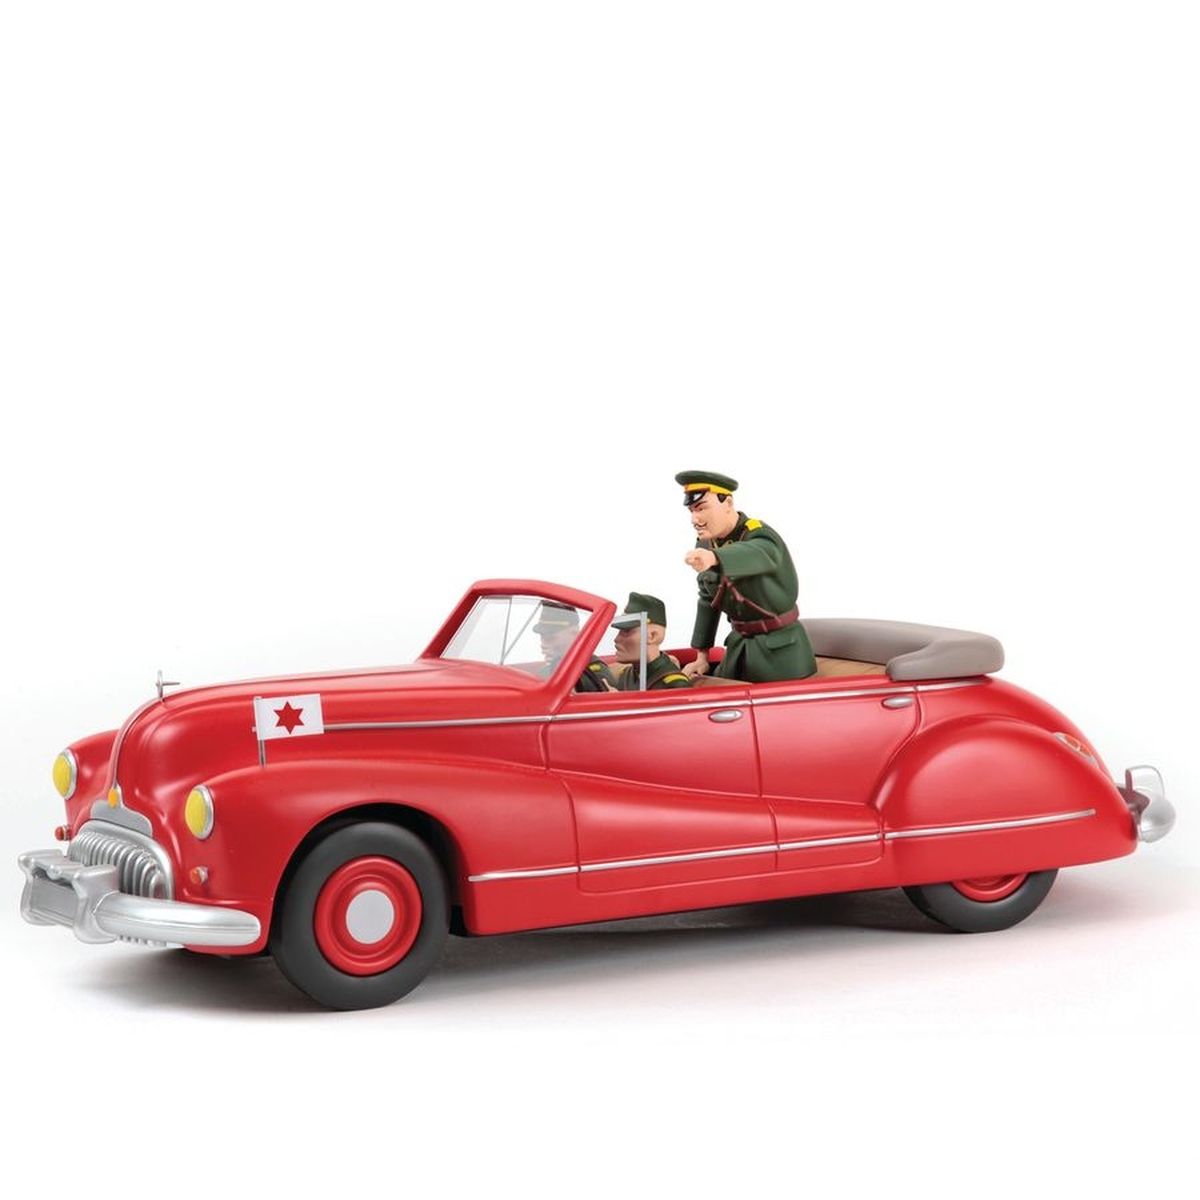 Jacobs : AROUTCHEFF: Blake and Mortimer, Olrik's Buick convertible (ARJ01), 2005&hellip;